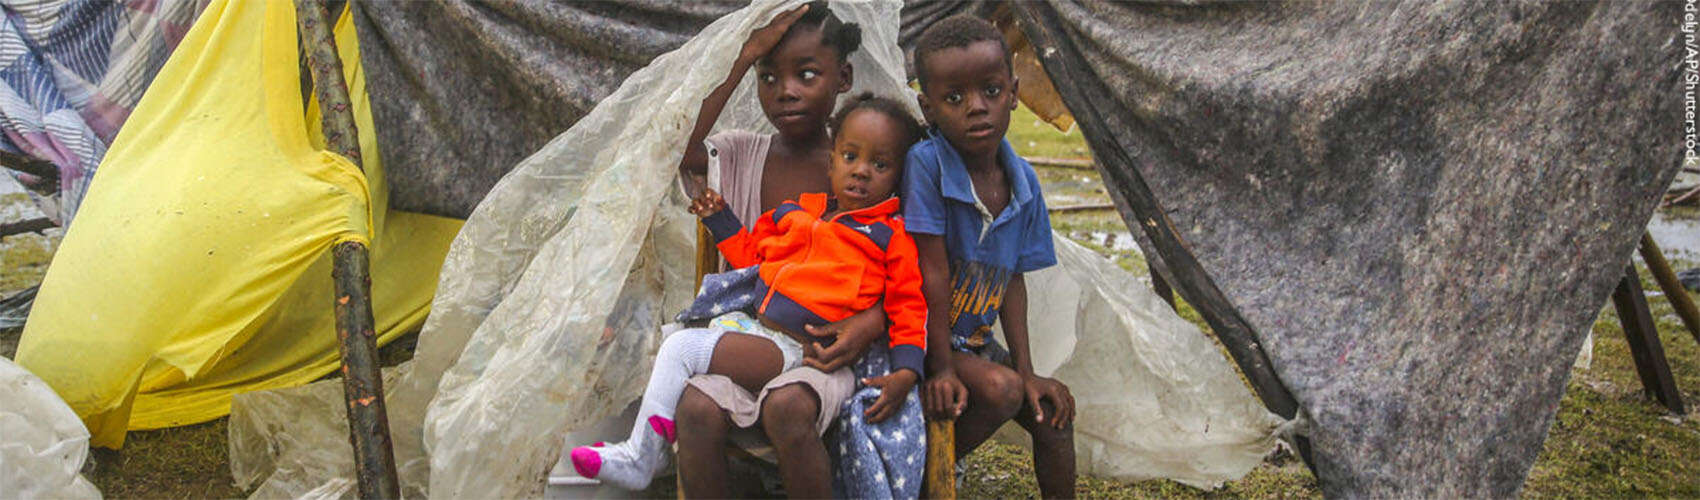 Three boys from Haiti sit in front of a tent. 